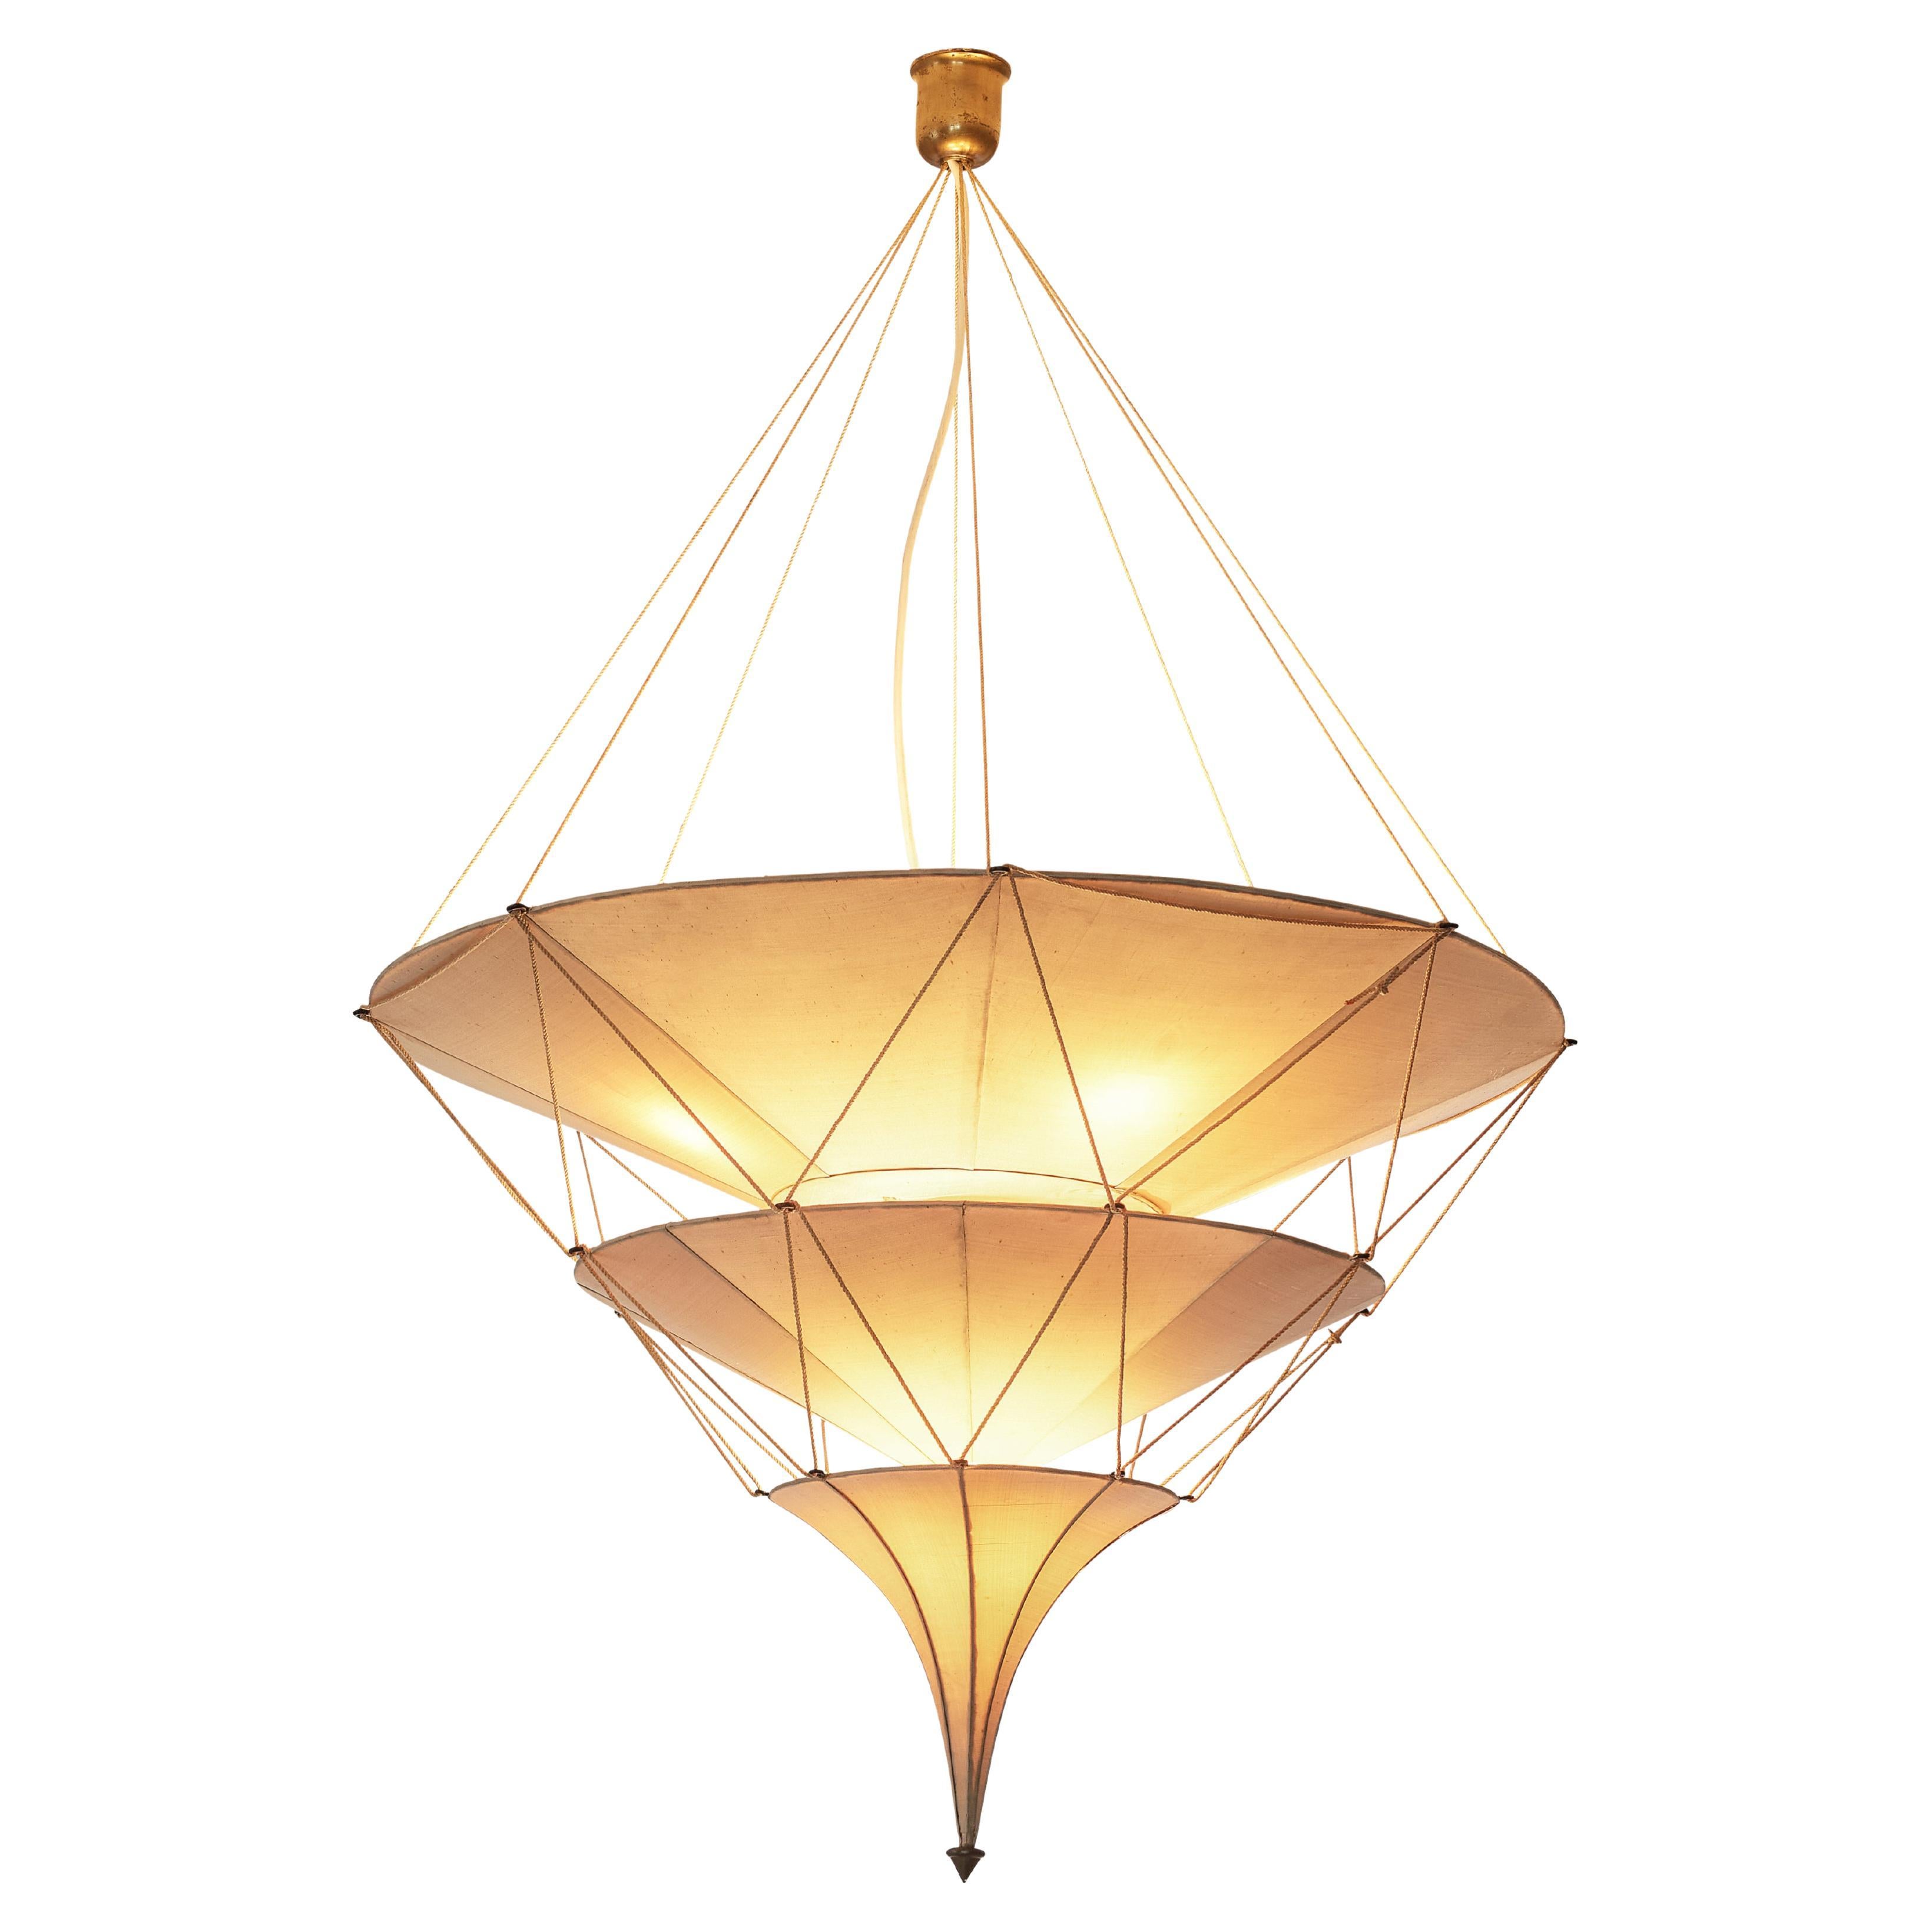 Delicate Mariano Fortuny 'Icaro' Chandelier in Silk For Sale at 1stDibs |  fortuny icaro chandelier, fortuny chandelier, fortuny silk chandelier